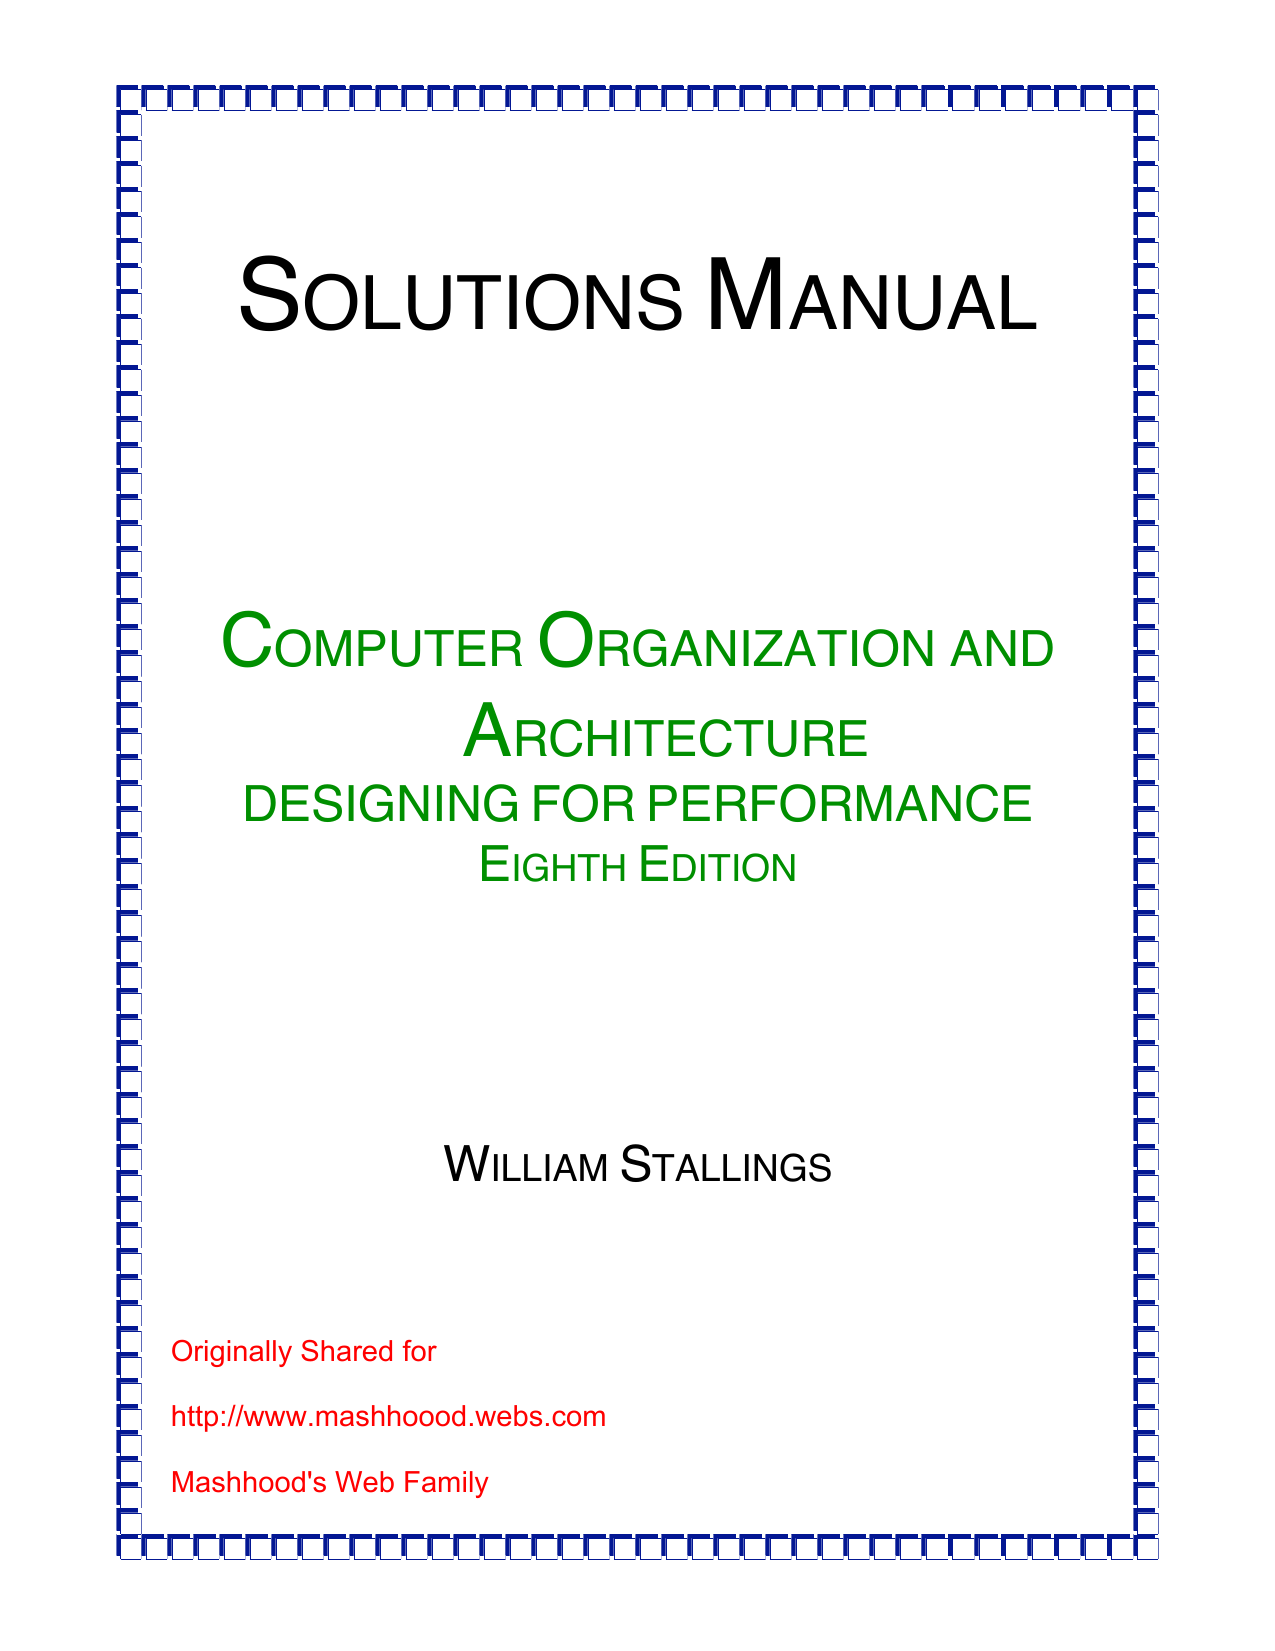 operating system william stallings 7th solution manual